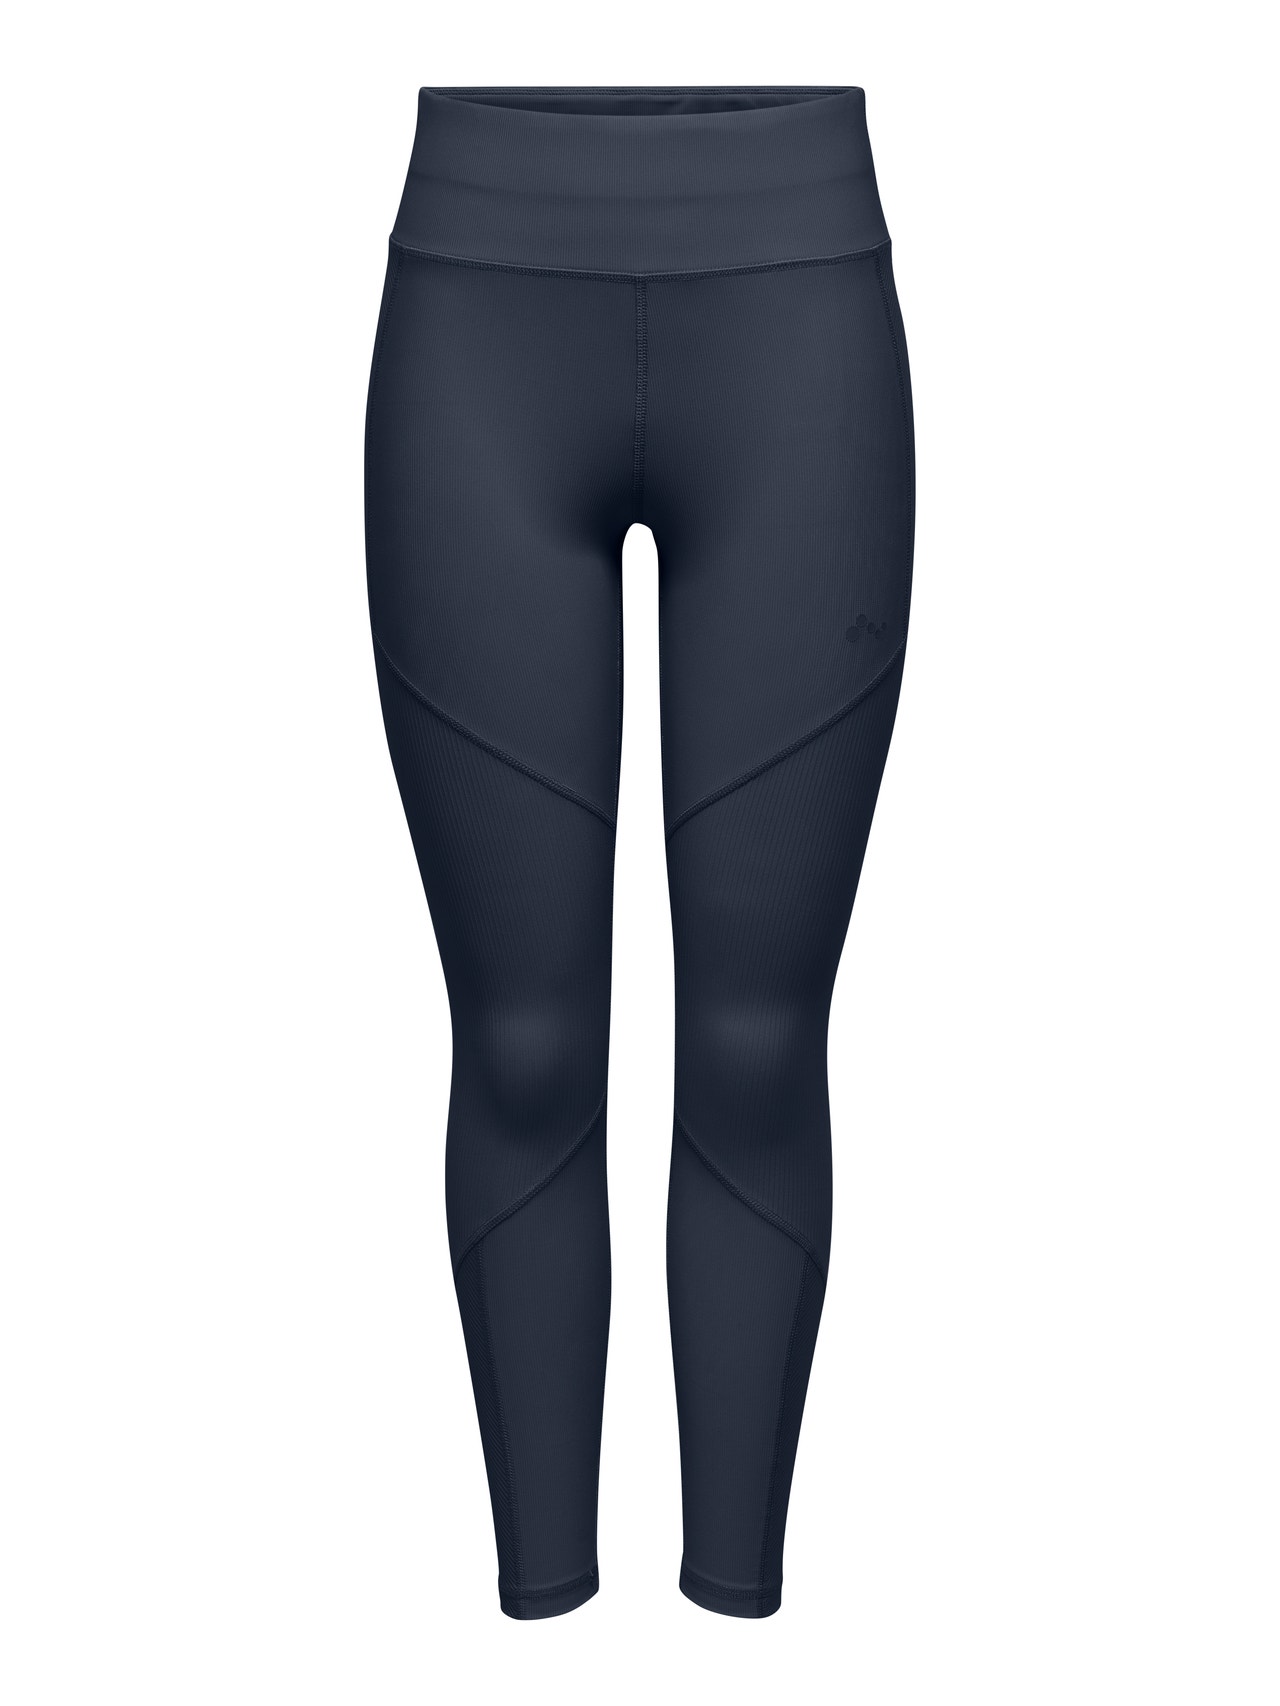 ONLY Tight Fit High waist Leggings -Blue Nights - 15207648